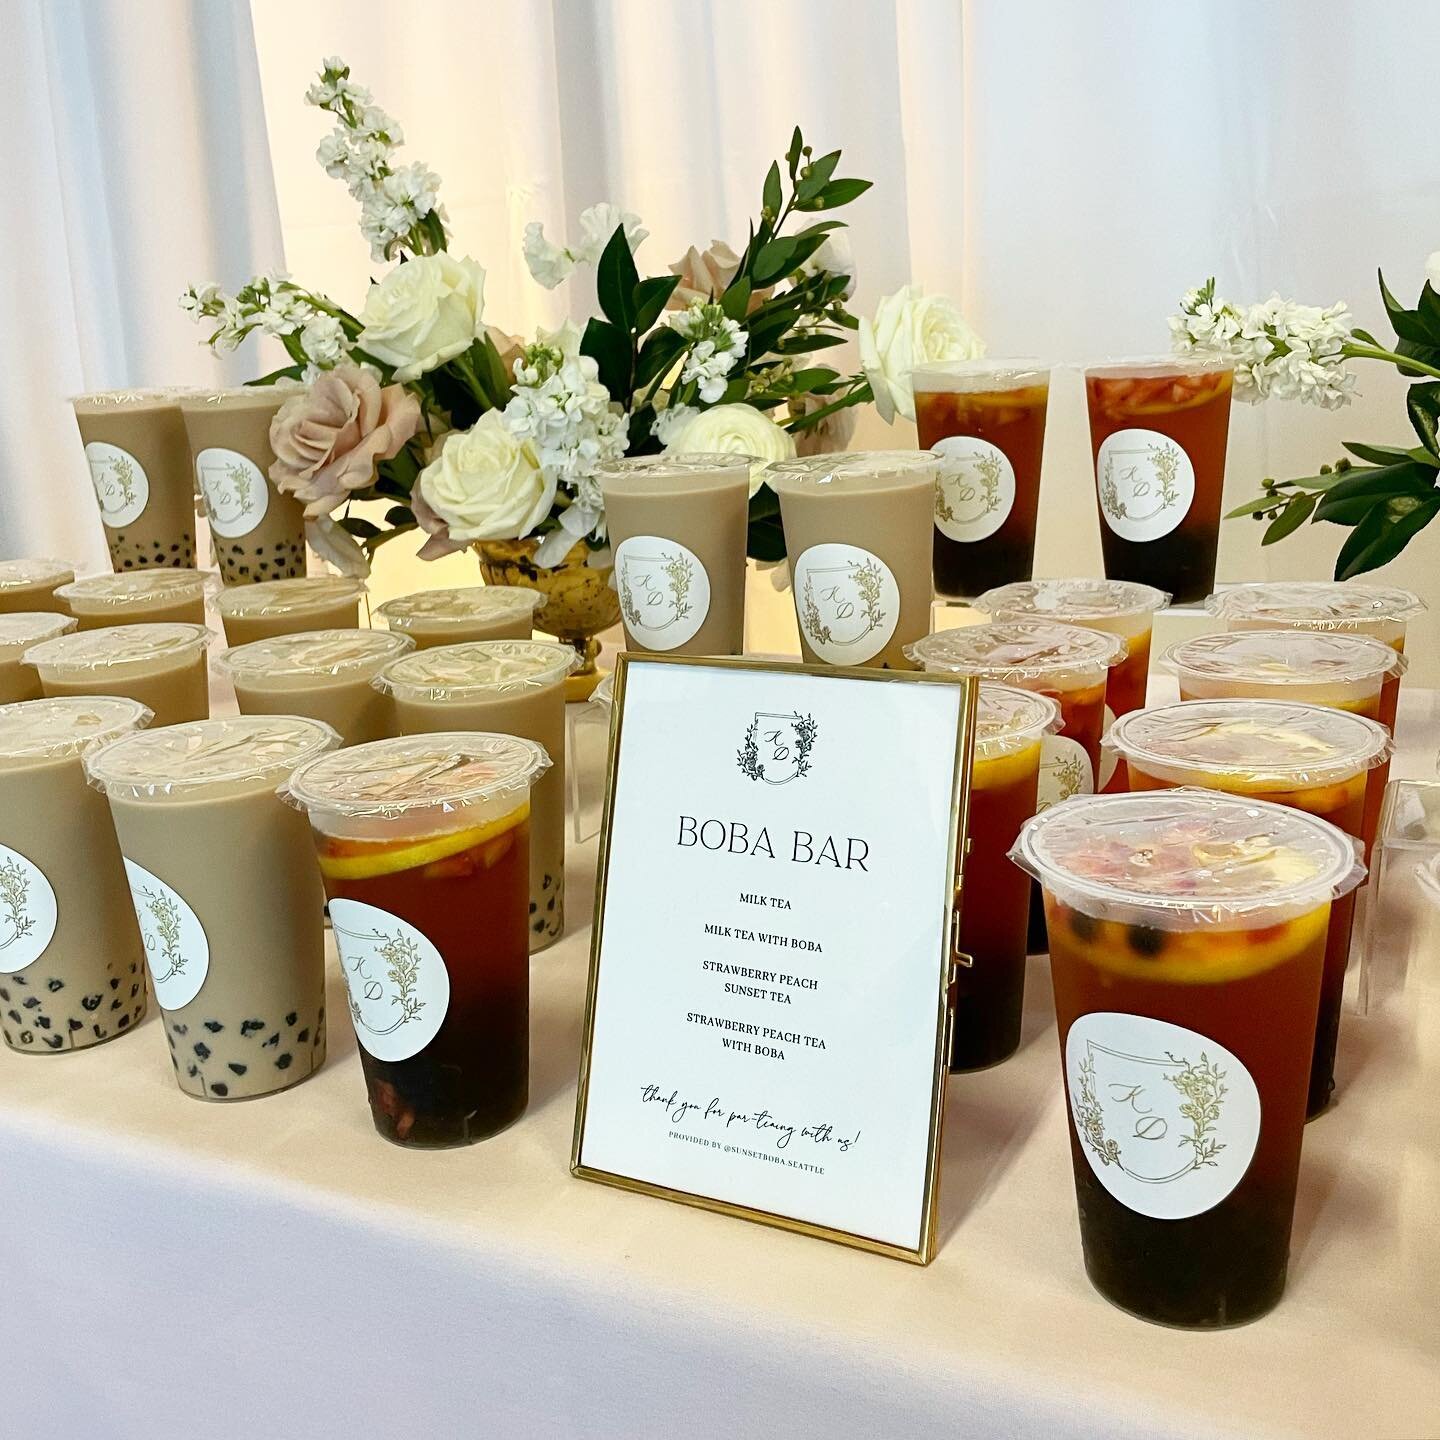 Swooning over this elegant boba display + the custom monogram on our drinks from @gianevents and @luckysisterpaperco 🤍

#boba #weddingboba #bobacatering